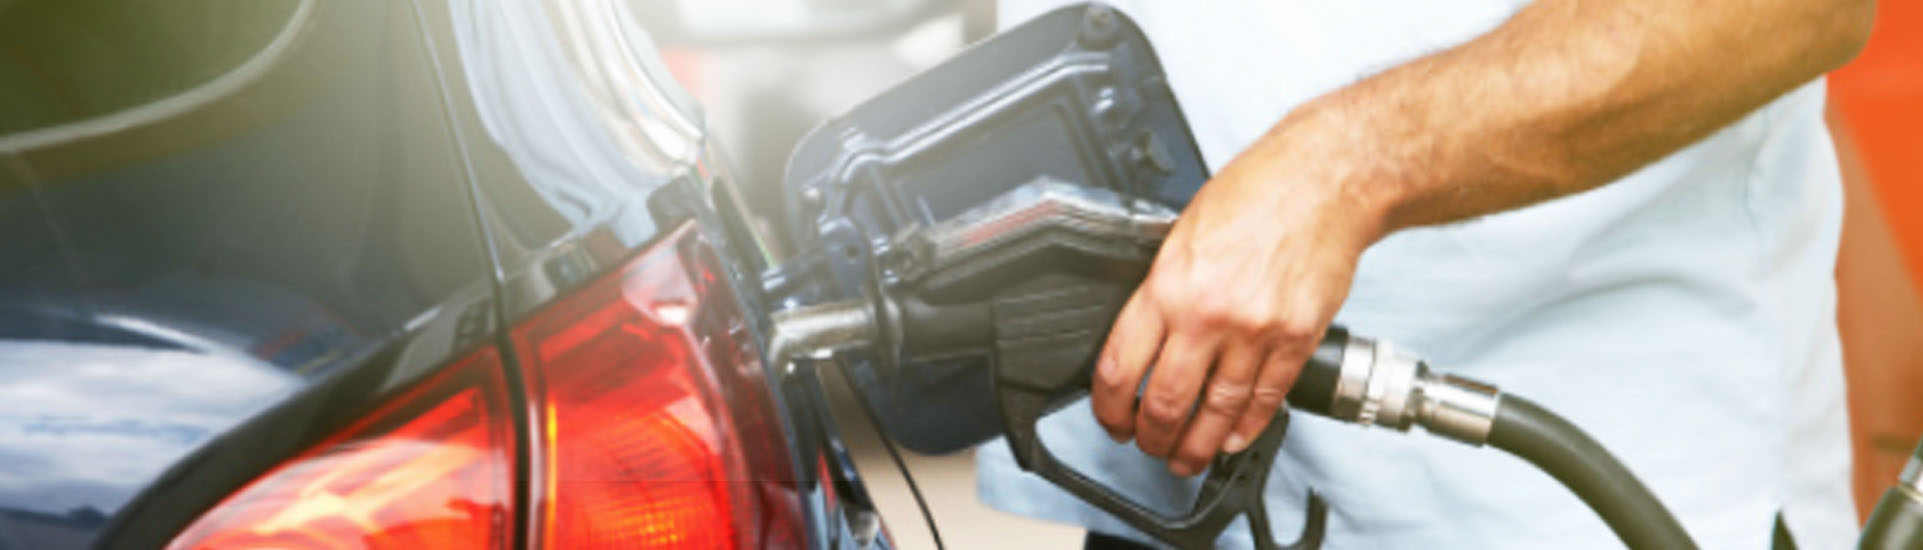 Filling car with cheap petrol with kiwi fuelcards